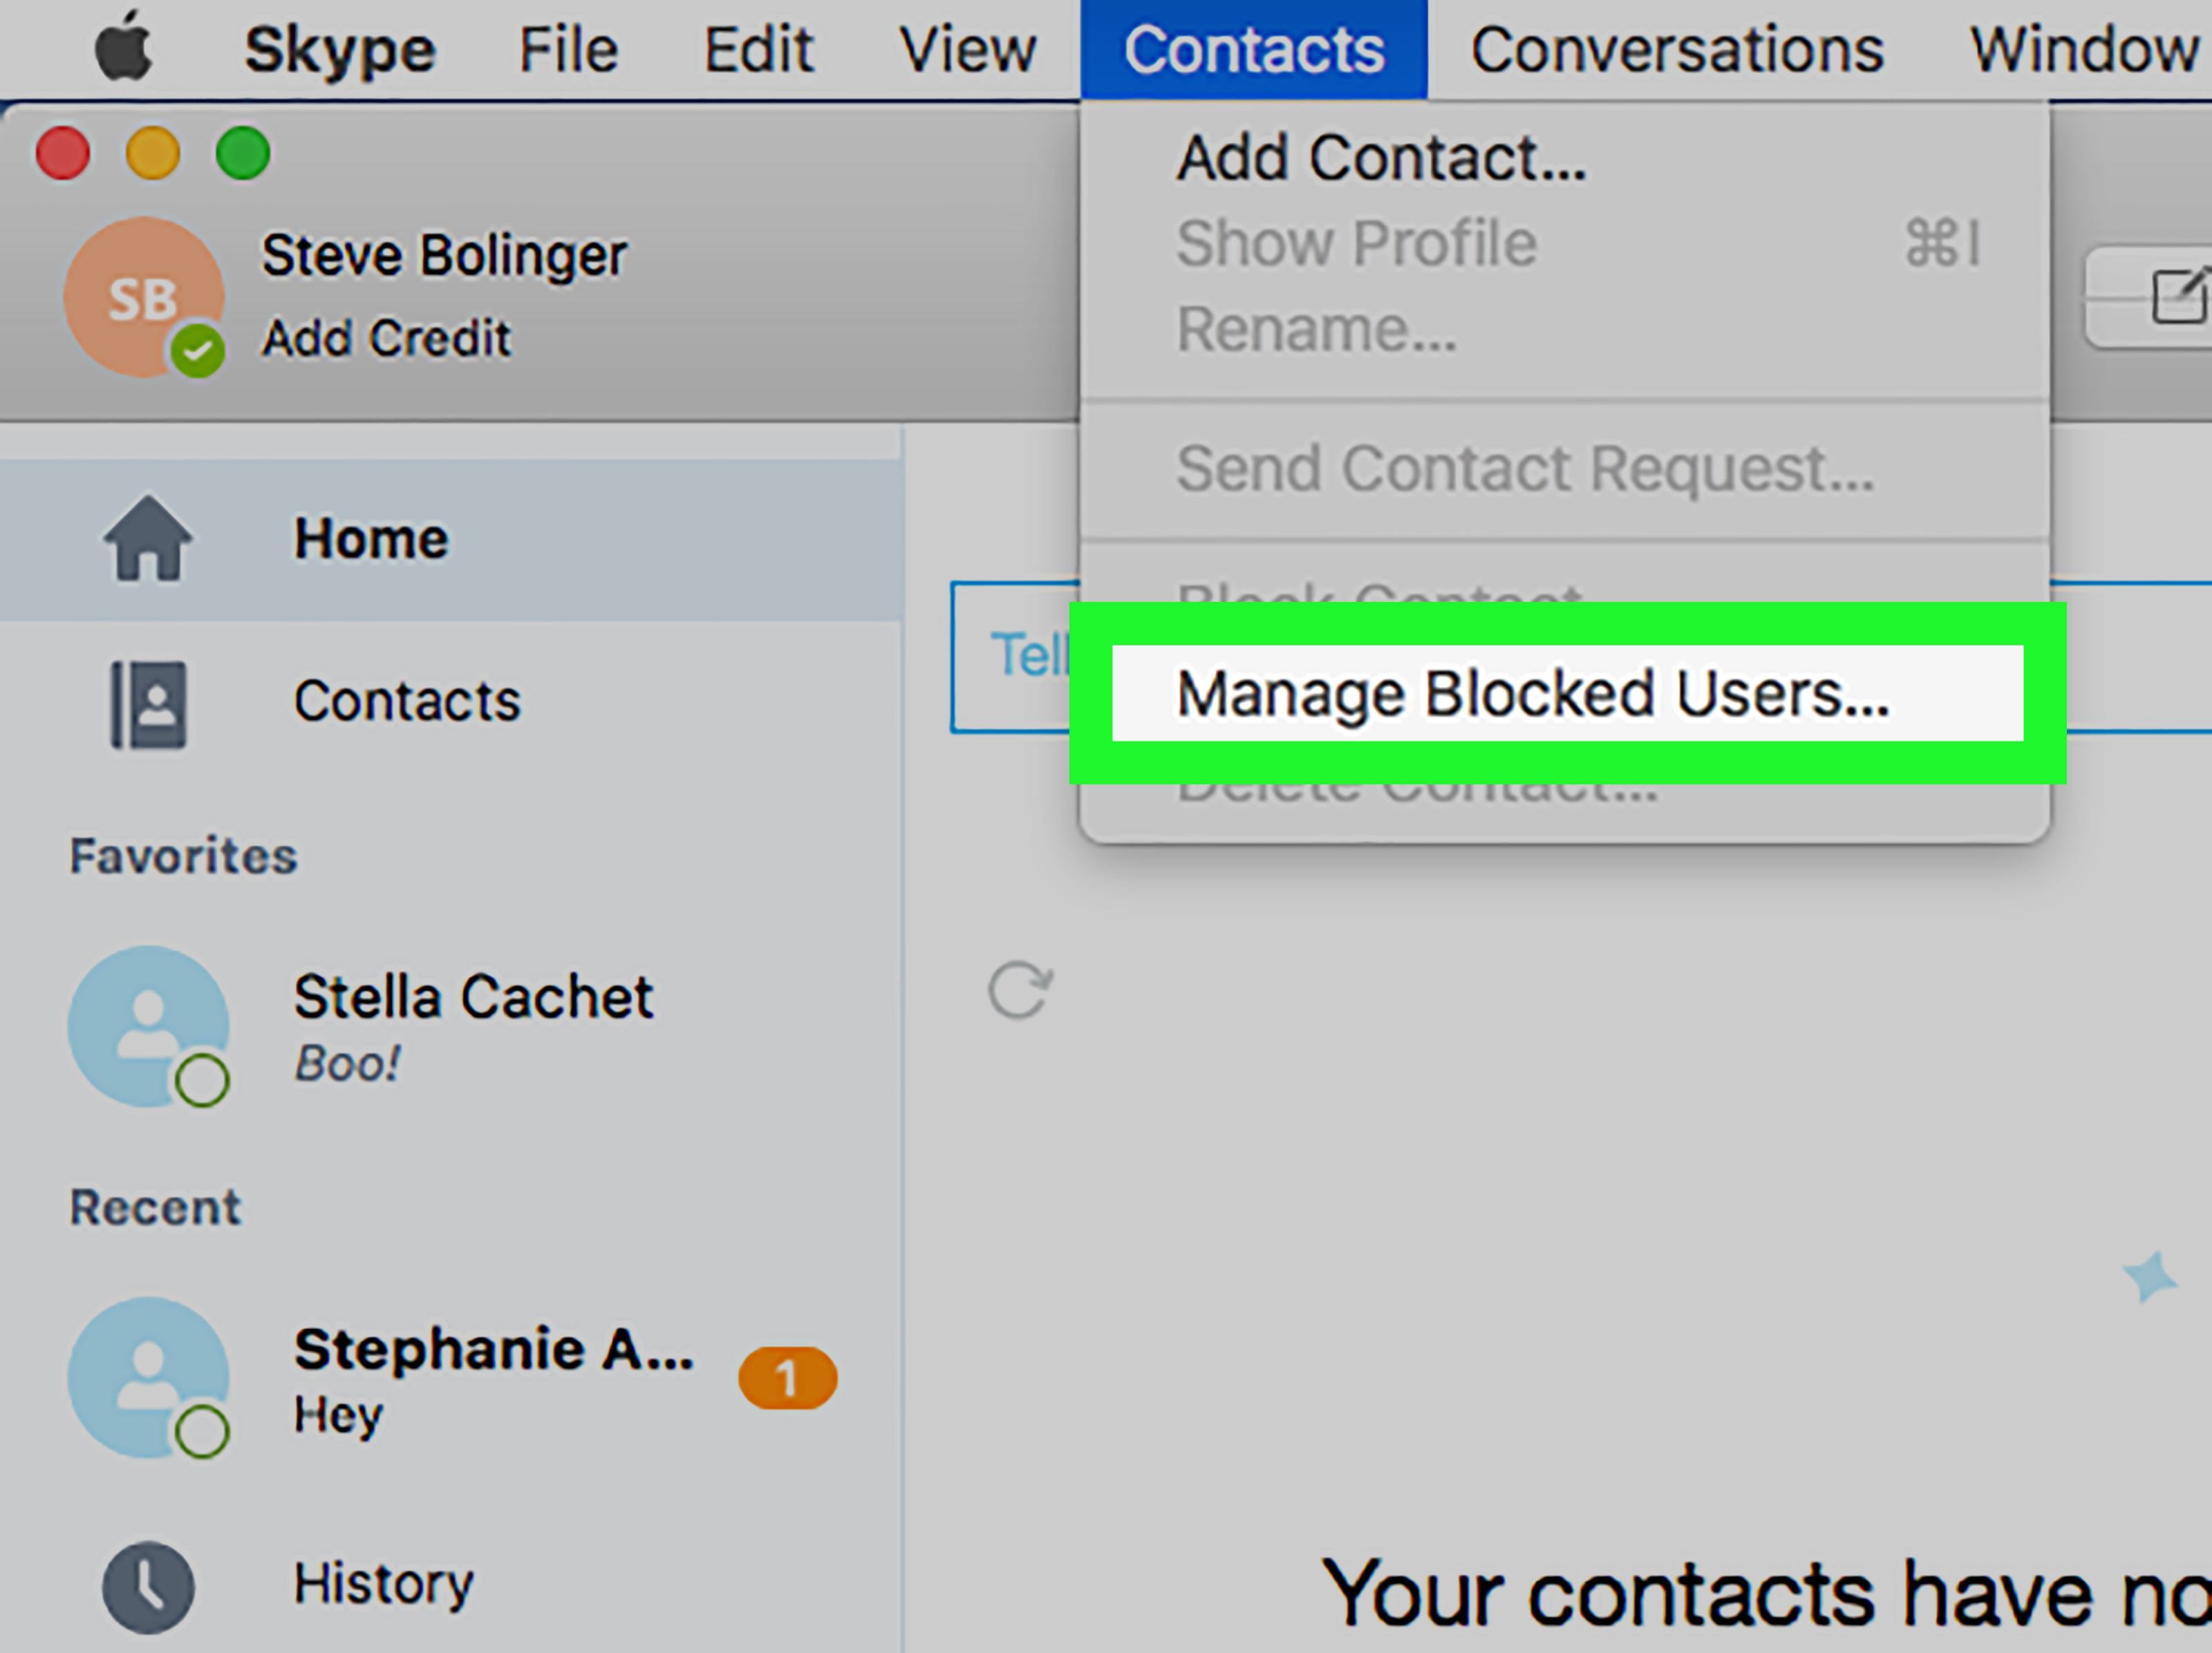 Blocked Contacts On Skype